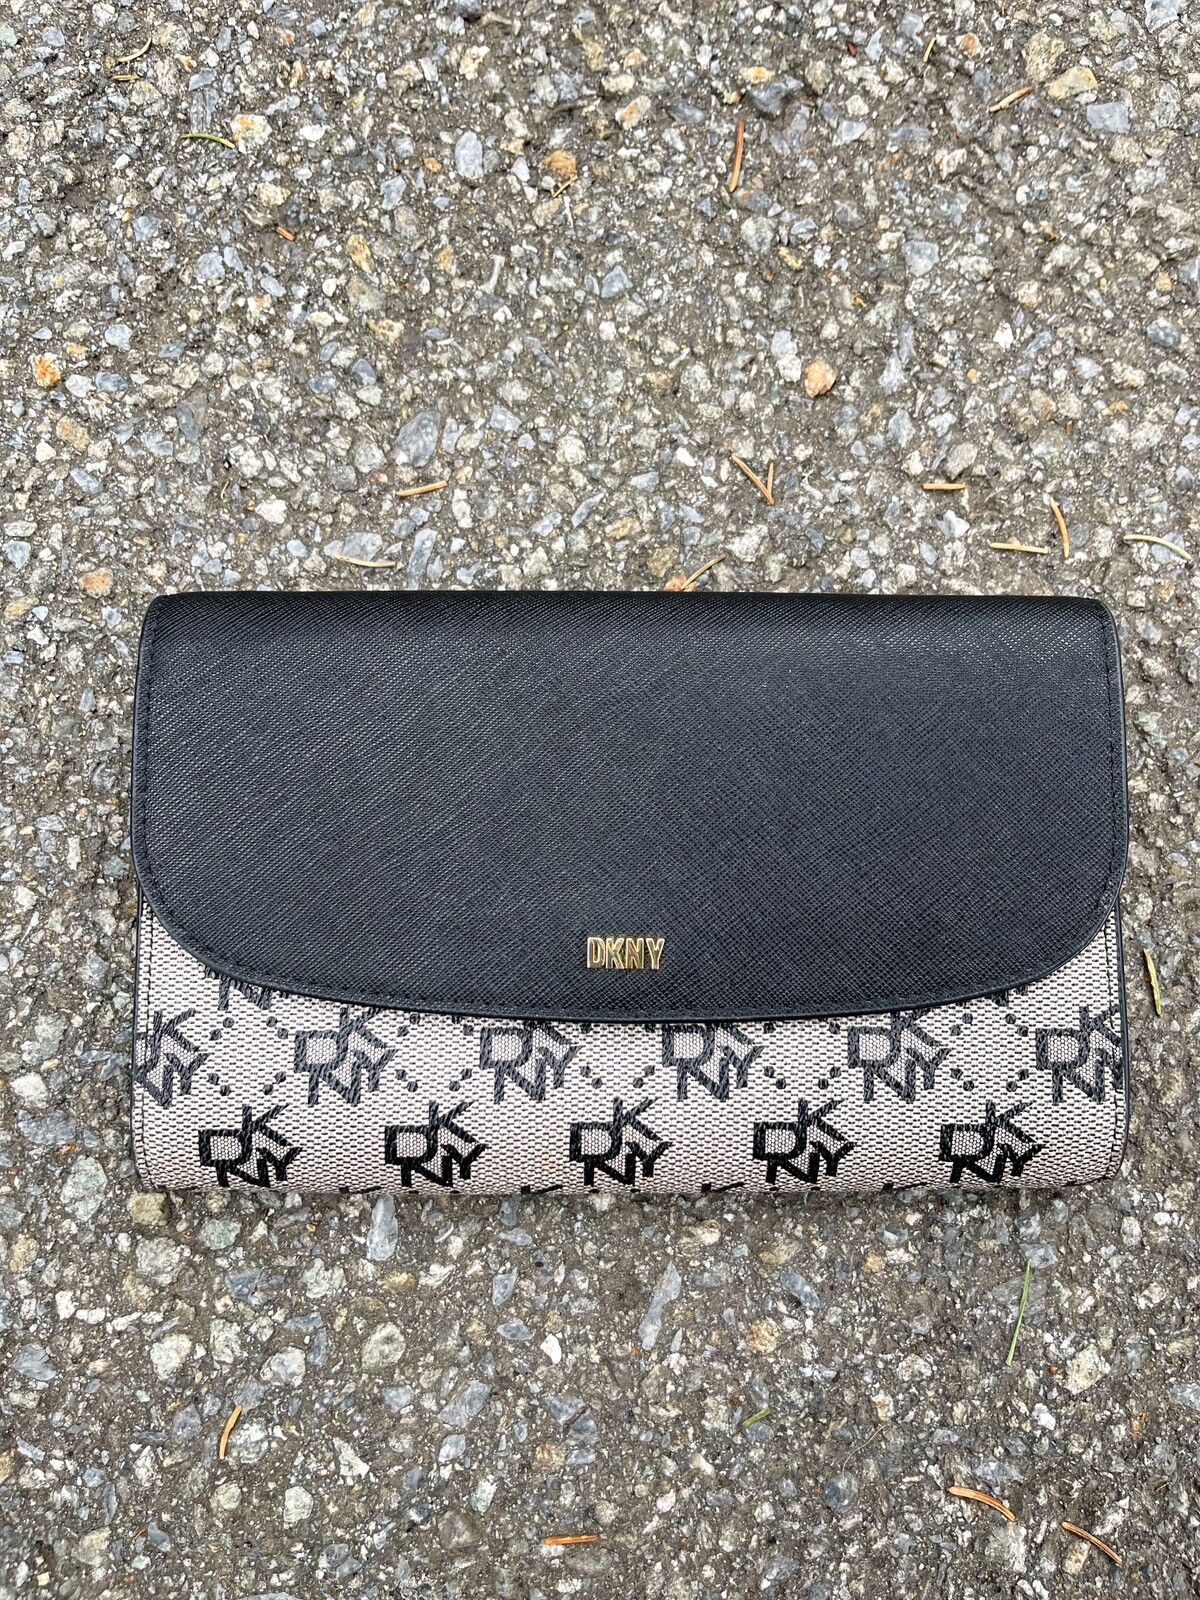 DKNY DKNY monogramm wallet mirror inside Size ONE SIZE - 1 Preview